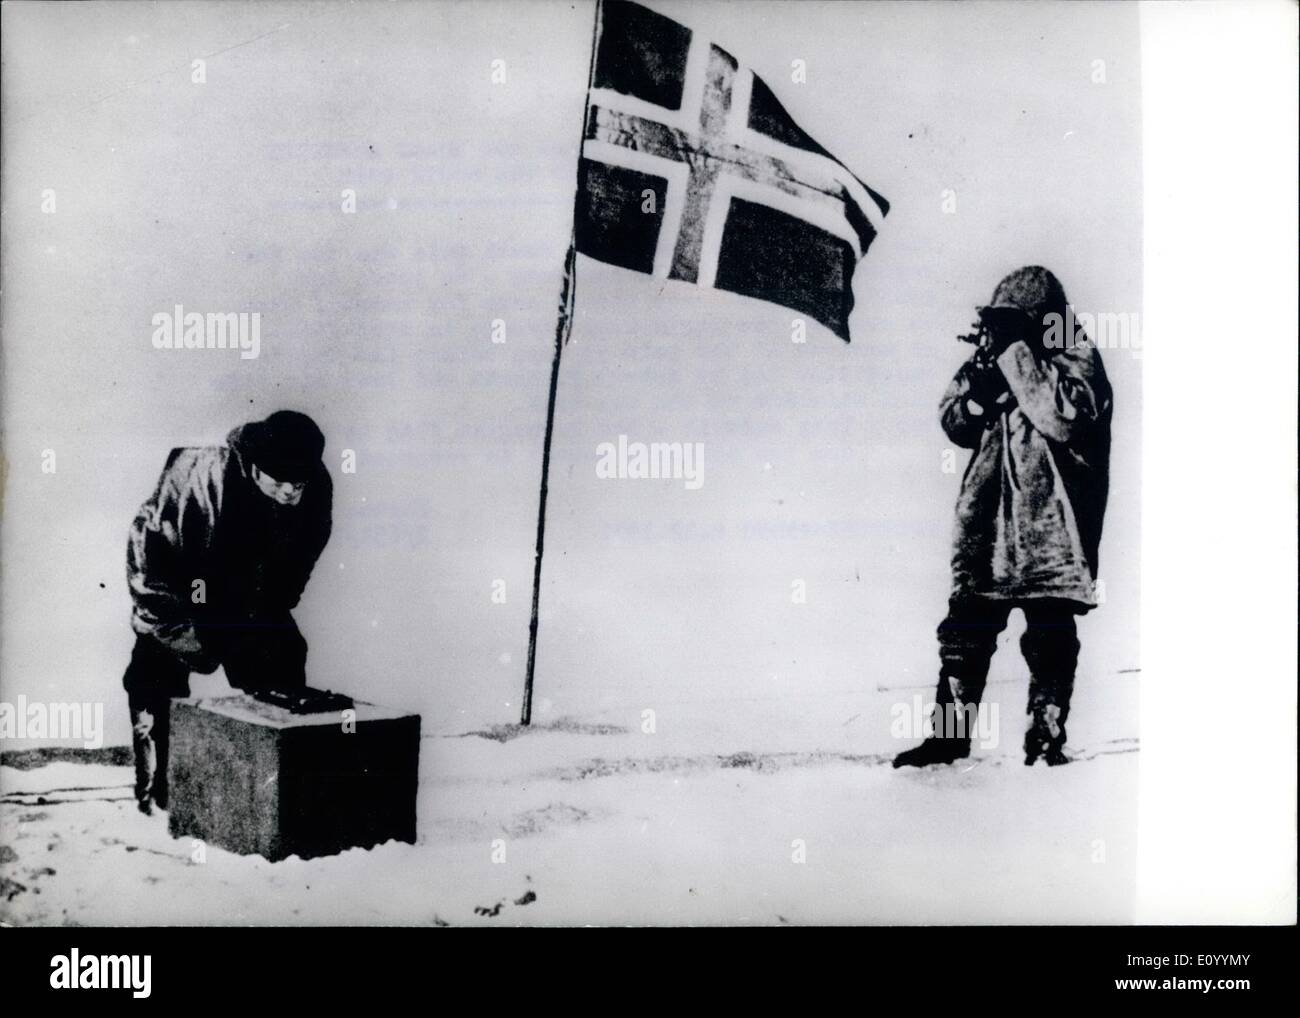 Dec. 12, 1971 - 14th December 1971: 60 Years Ago Roald Amundse Reached The South Pole: The first man to reach the South Pole was the Norwegian explorer Roald Amundsen-60 years ago! Amundsen had already made a name for himself when he crossed to North-West Passage in 1903-1906. He arrived at the pole 53 days before the English expedition led by Robert F. Scott who loat his life in a blizzard on the way back. Photo shows. They made it-the Norwegian flag is hoisted, and the historic moment is recorded on film. Stock Photo